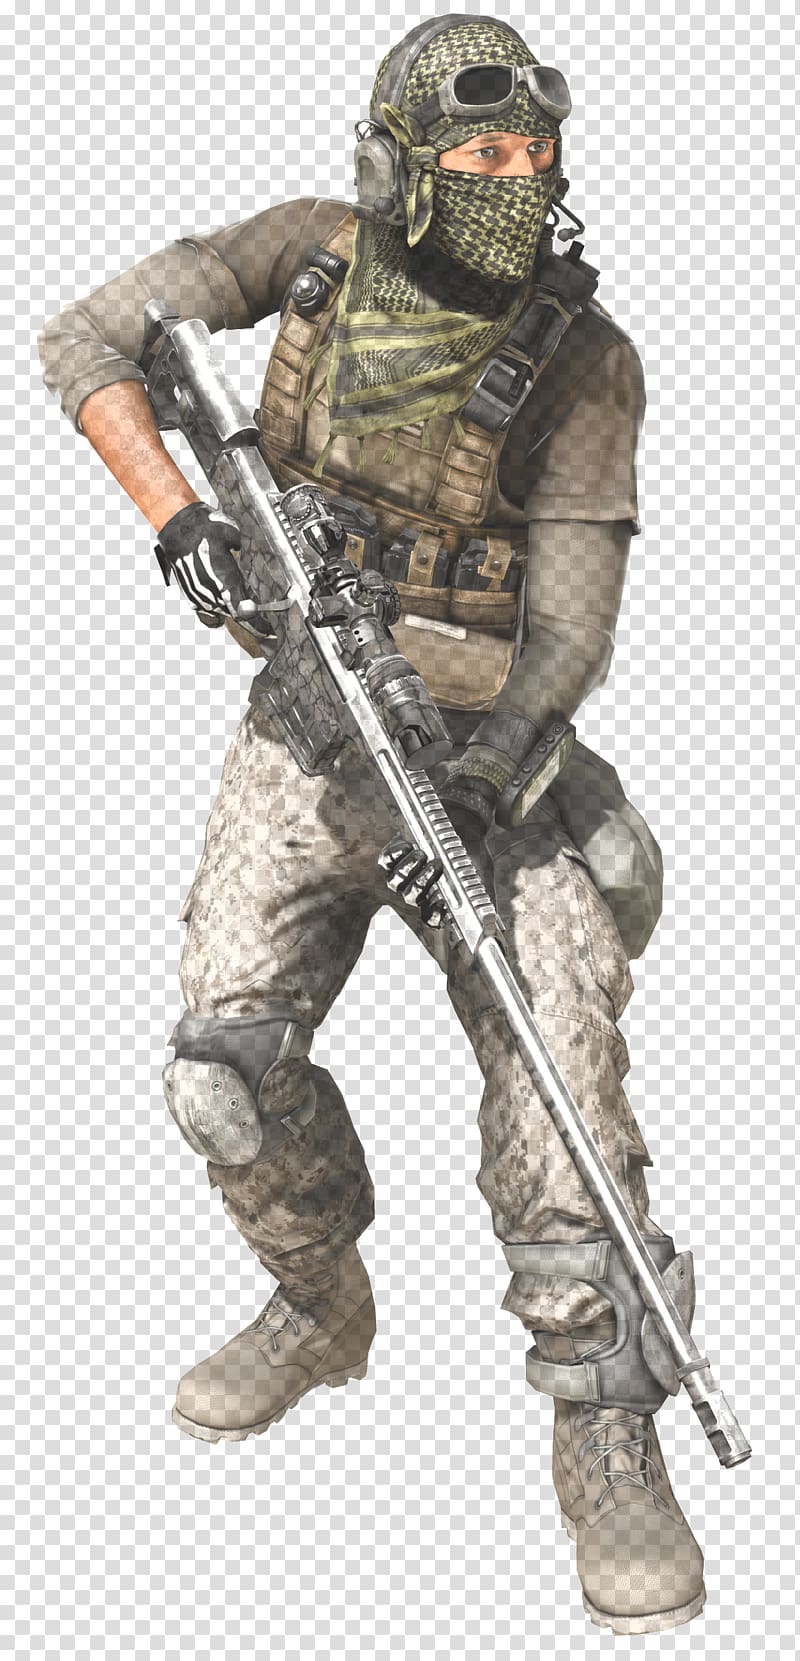 Battlefield 3 Battlefield 2 Battlefield 1 Battlefield: Bad Company 2: Vietnam Battlefield 4, Battlefield transparent background PNG clipart